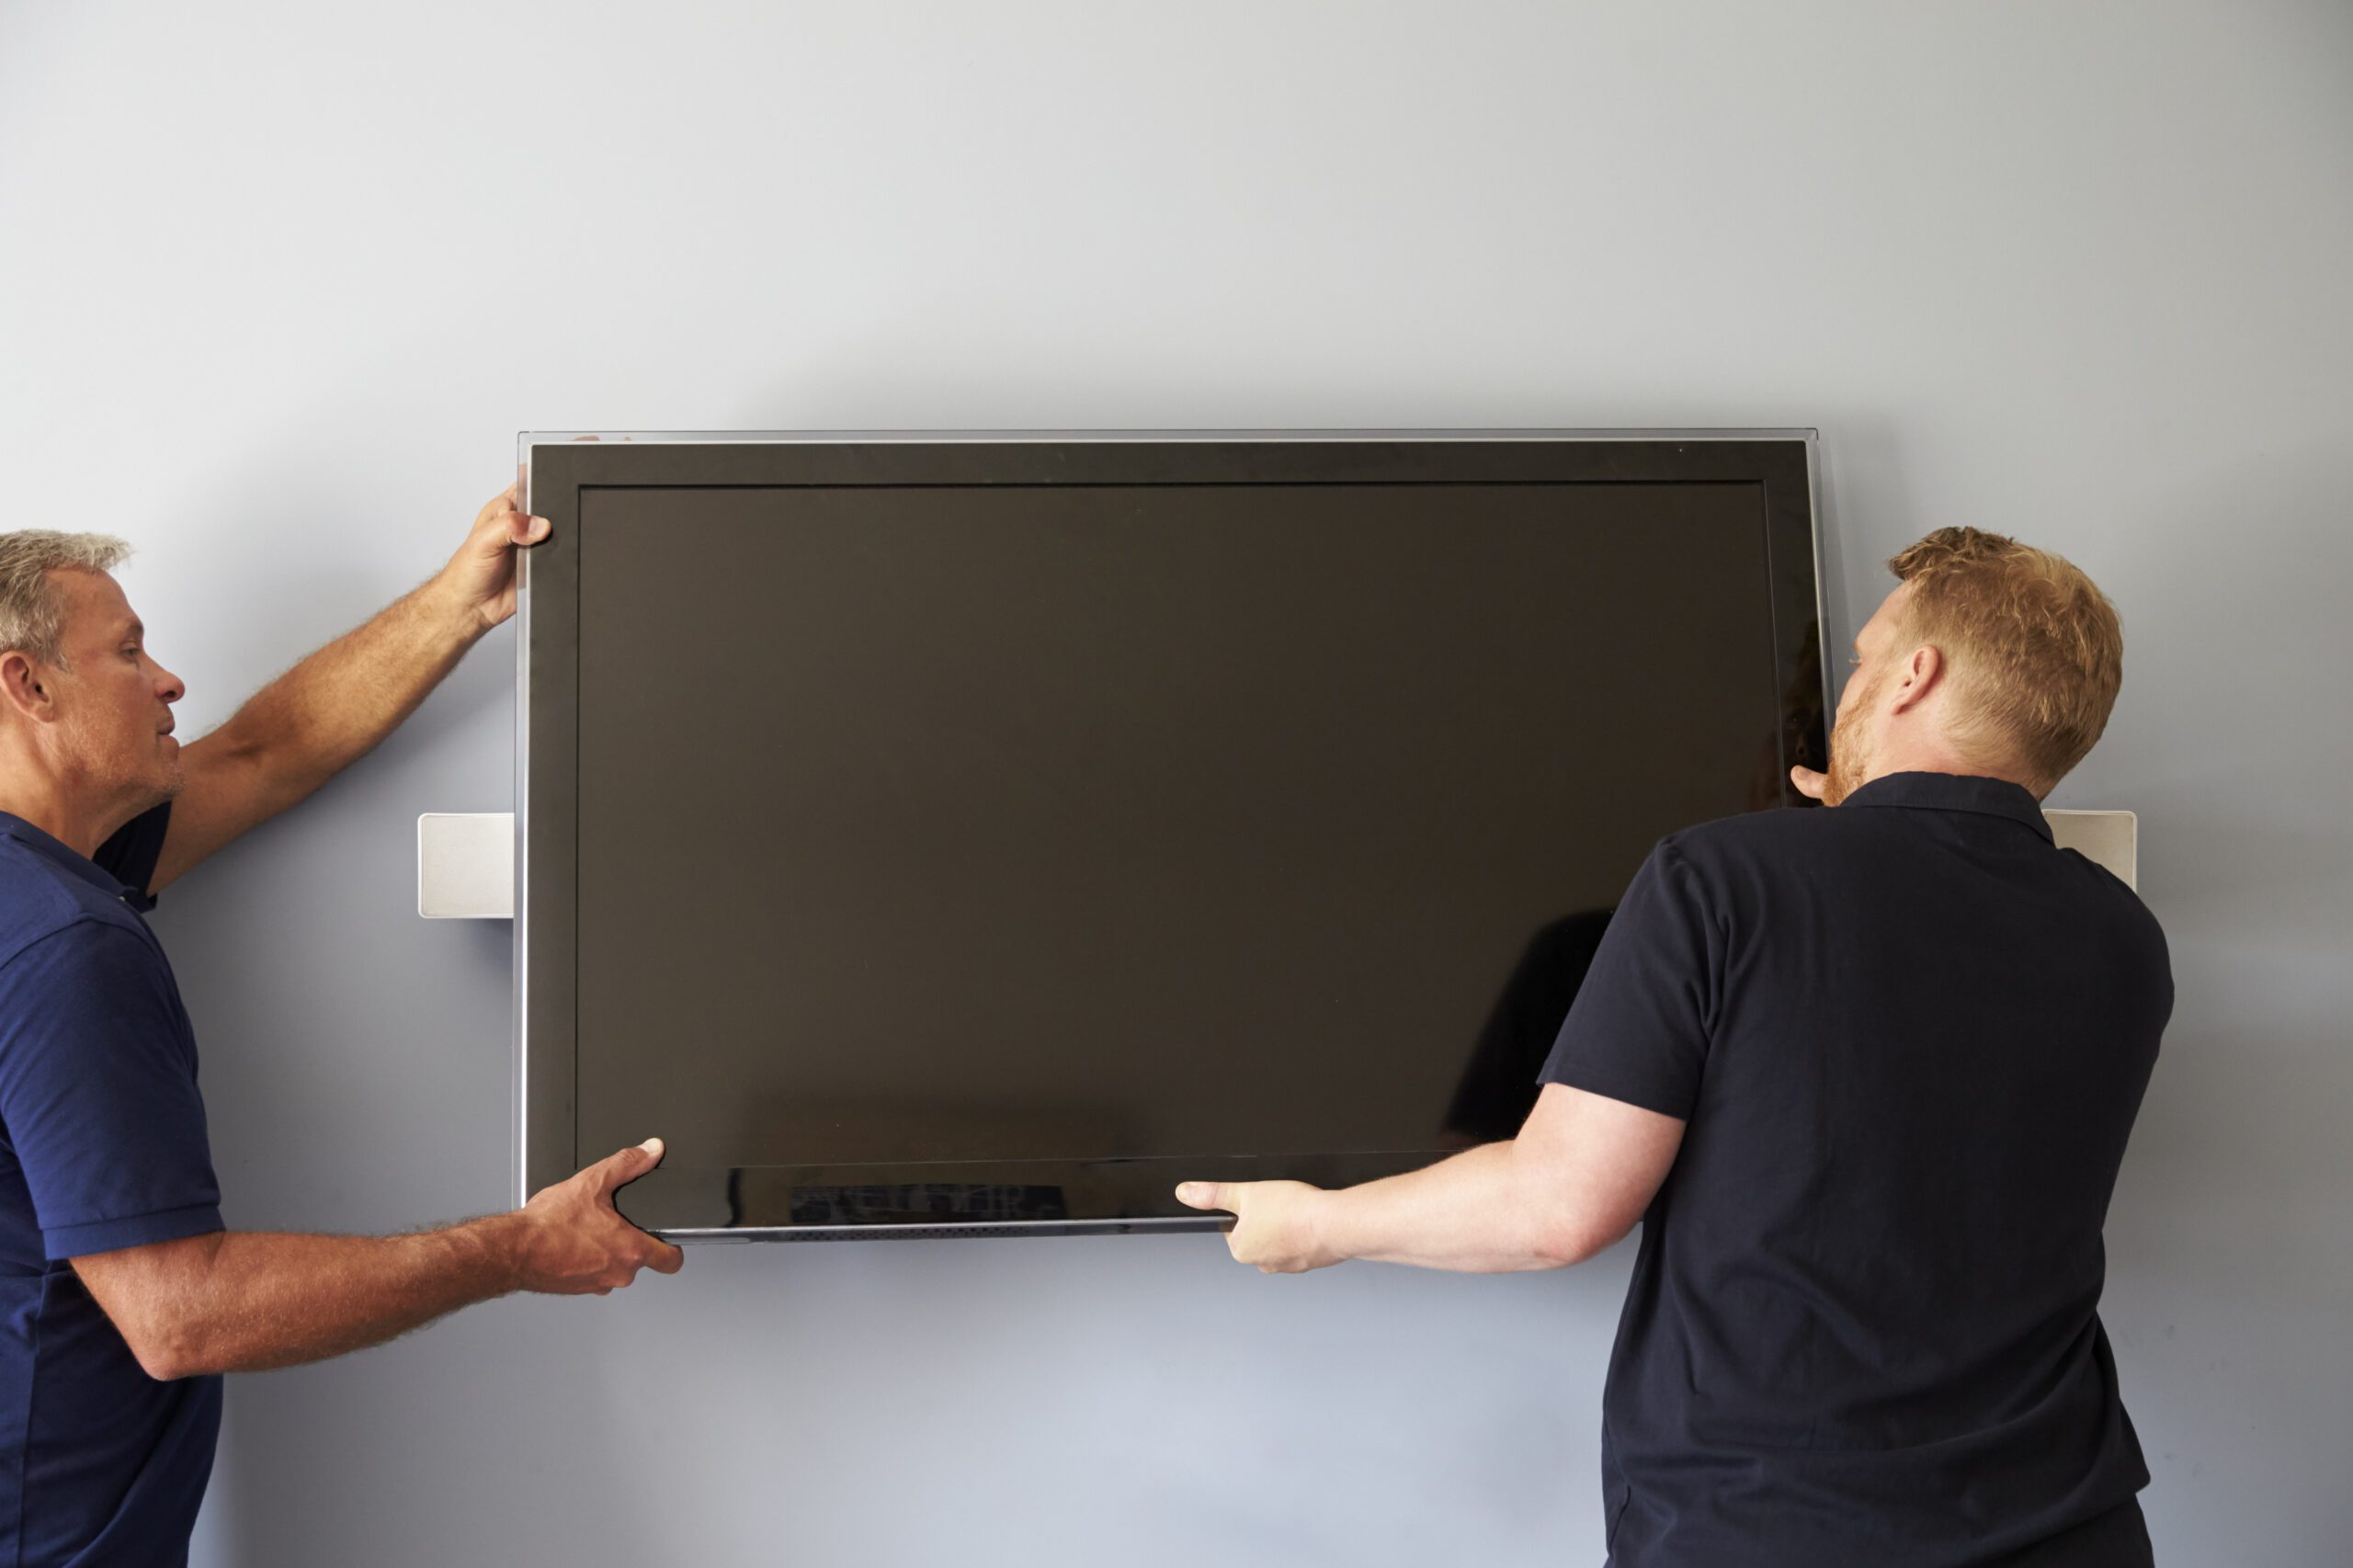 two men lifting a tv based on how high it should be mounted